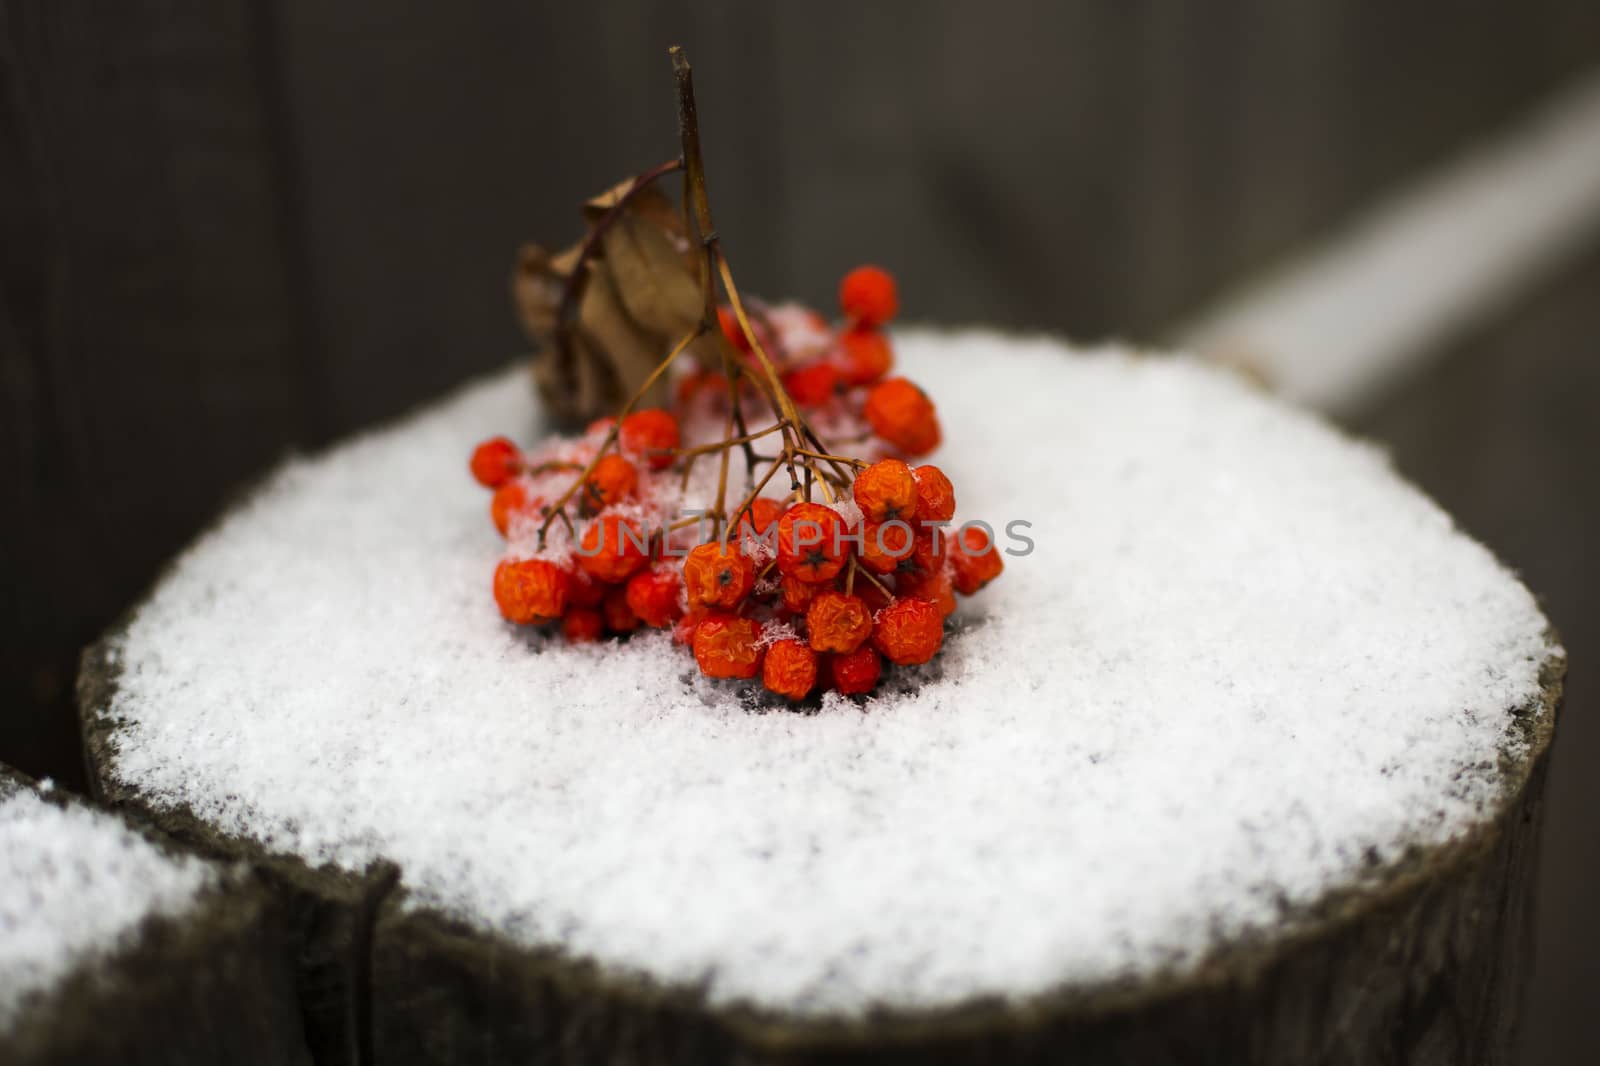 A red rowan-berry branch lies on the brown stump and first snow